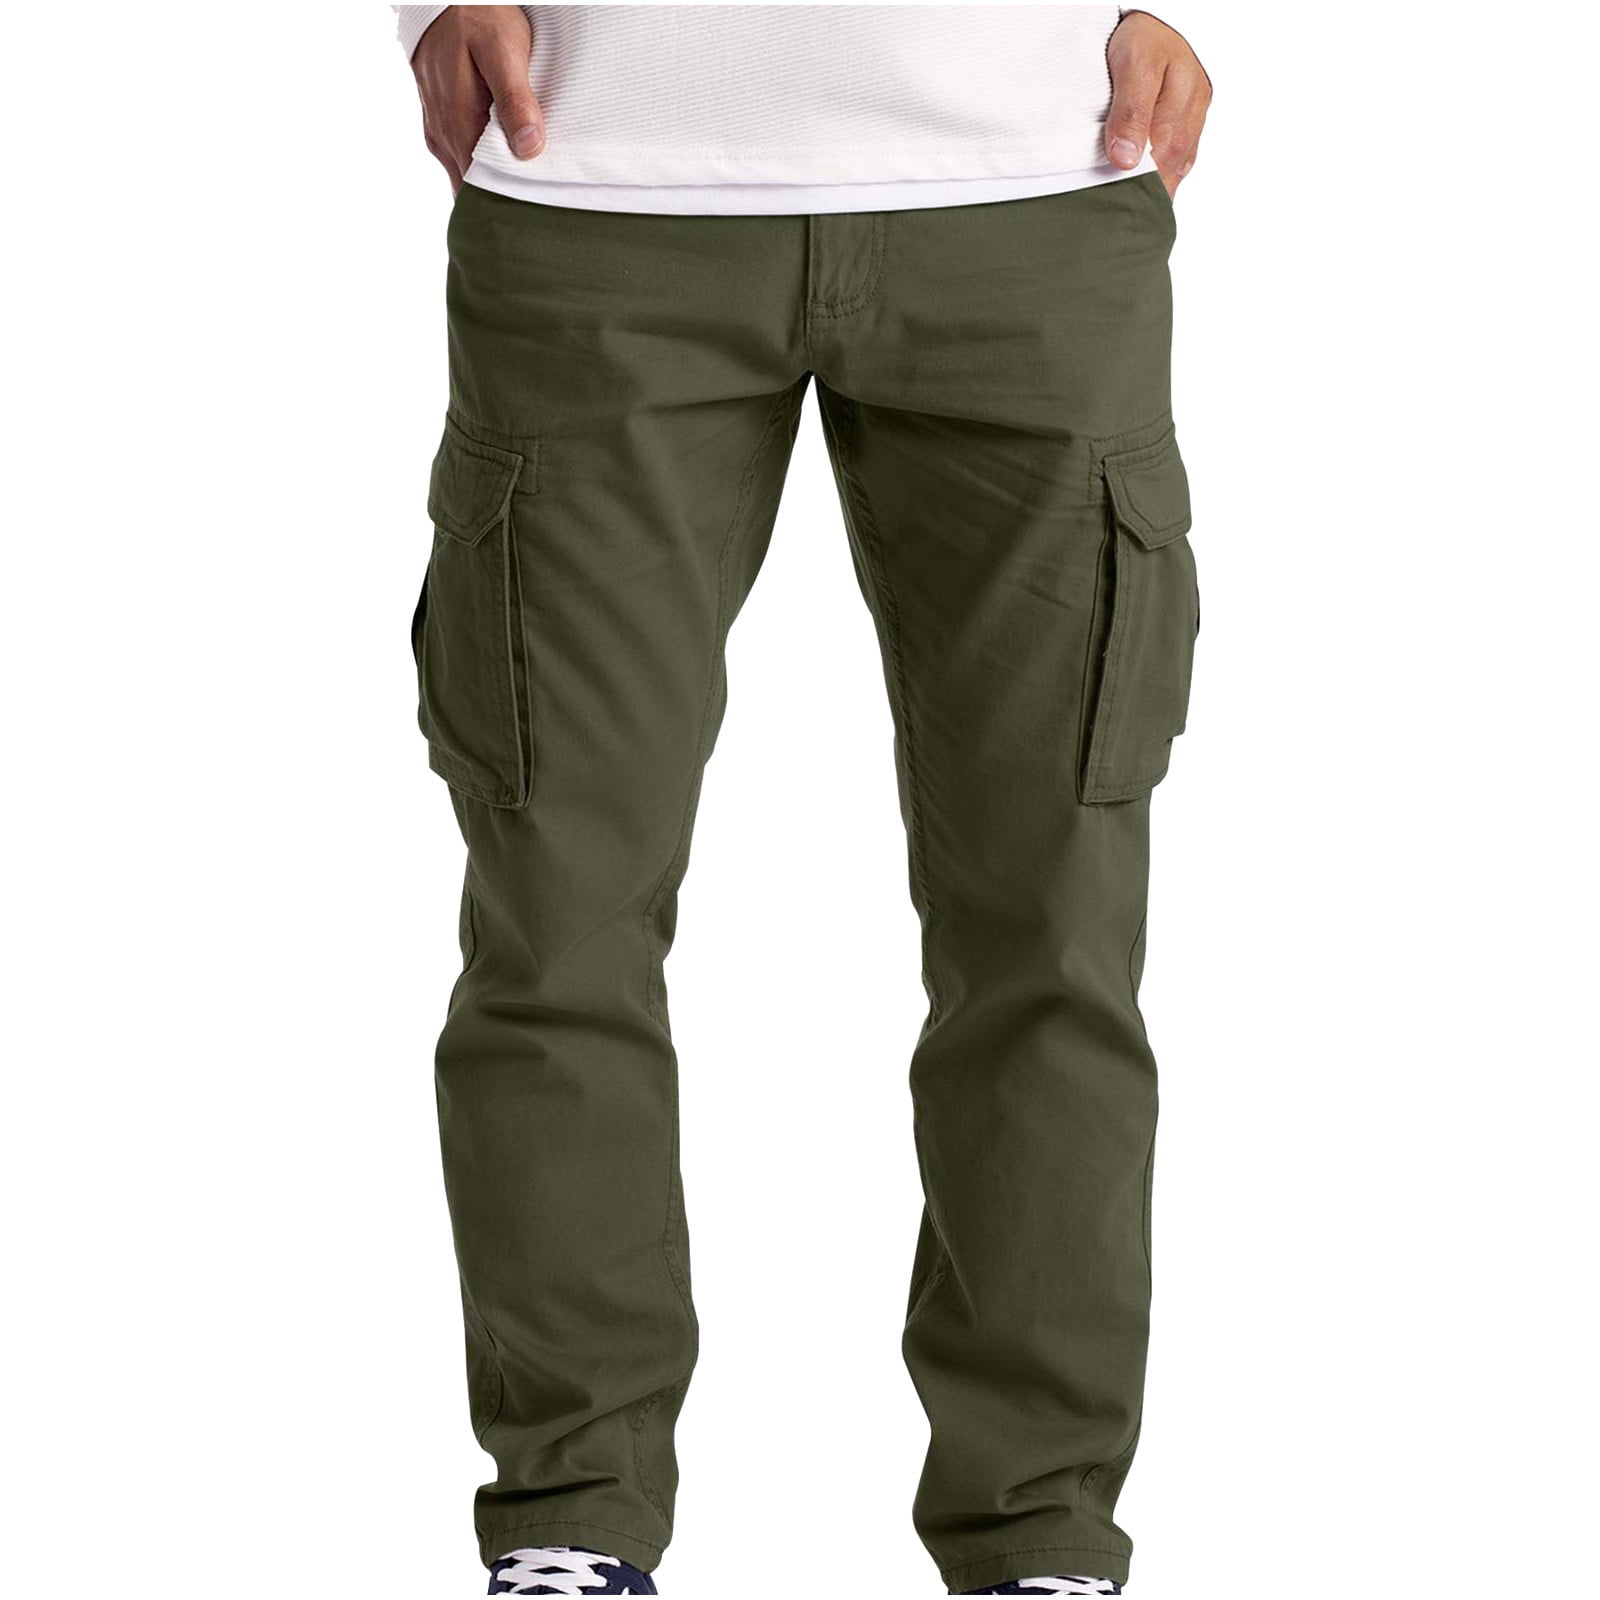 ZKCCNUK Cargo Pants for Men\'s Cargo Trousers Work Wear Combat Safety Cargo  6 Pocket Full Pants Army Green XL on Clearance